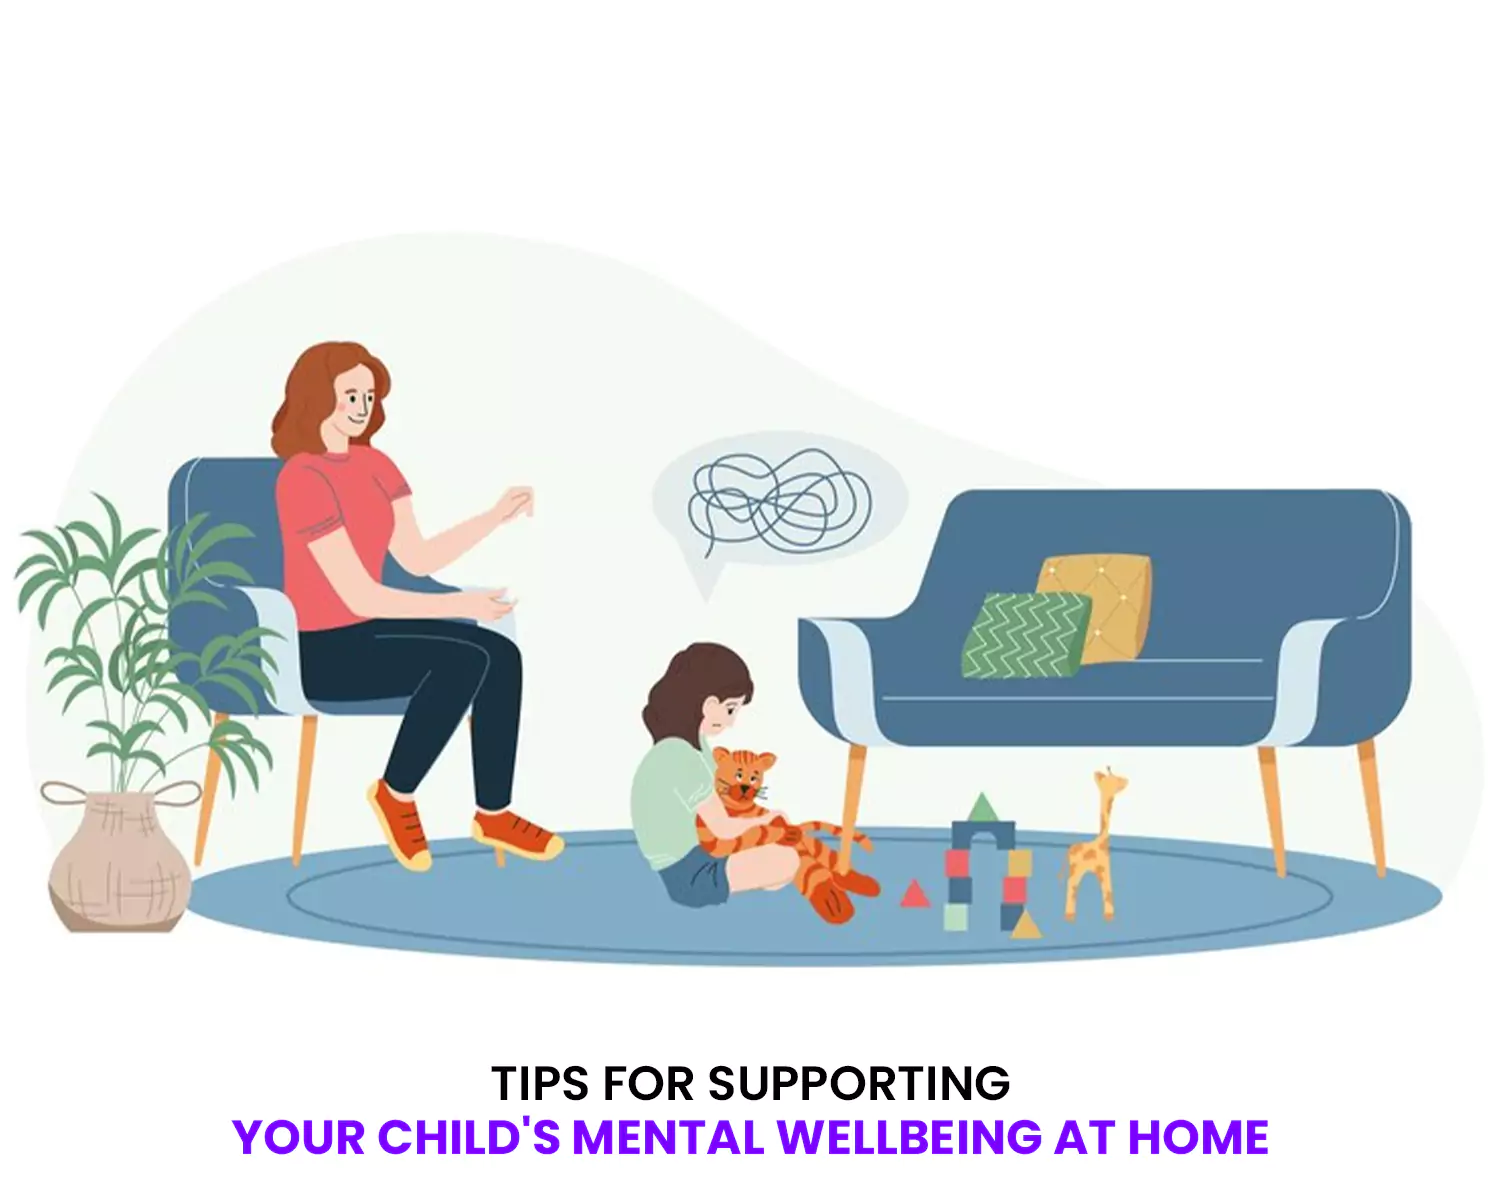 Tips for Supporting Your Child's Mental Wellbeing at Home